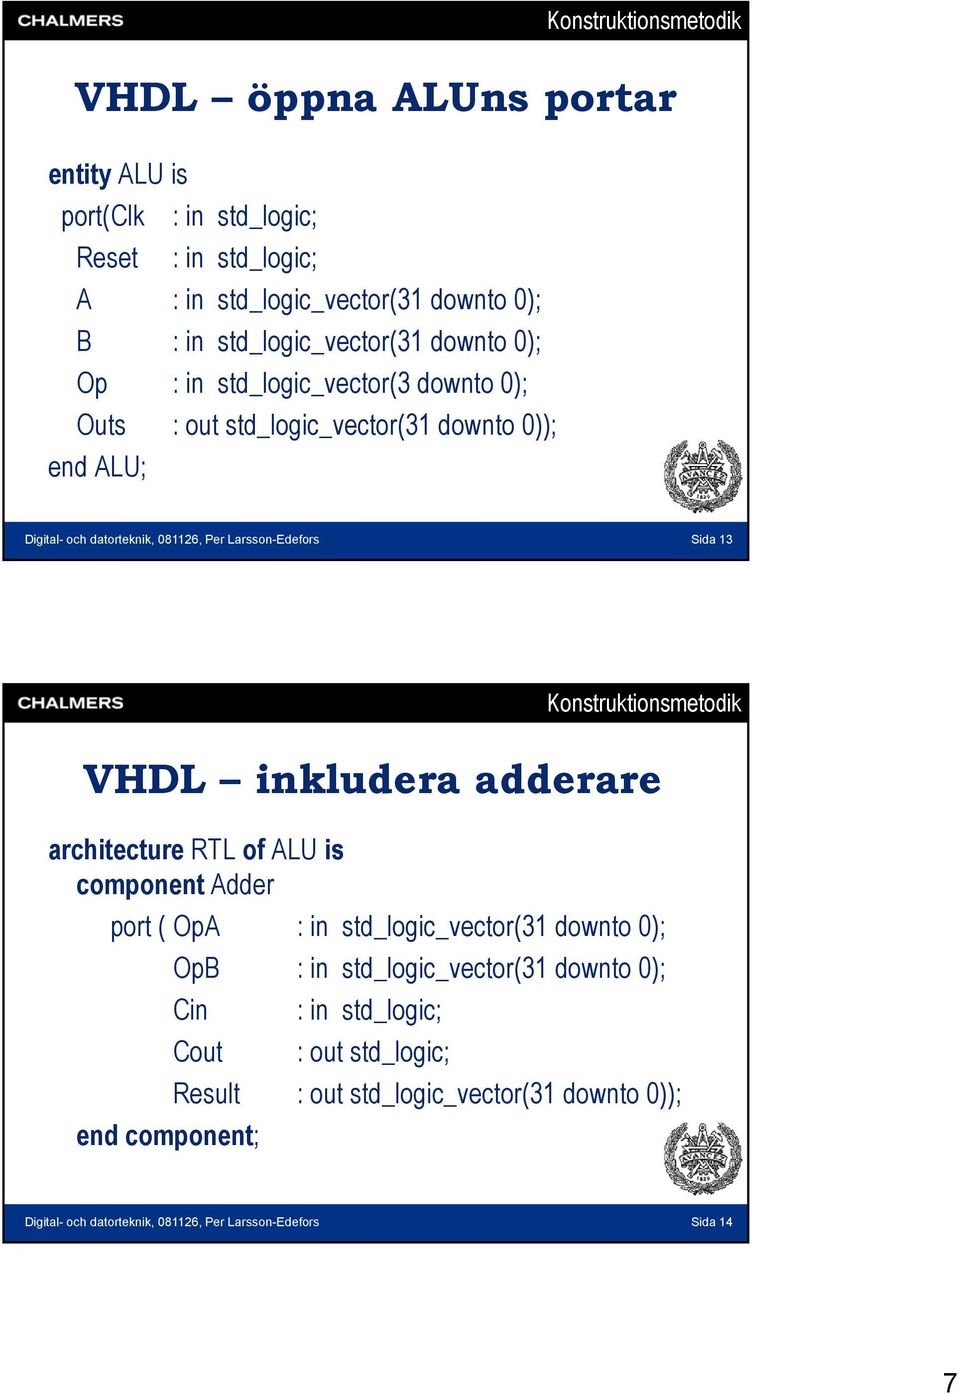 Larsson-Edefors Sida 13 Konstruktionsmetodik VHDL inkludera adderare architecture RTL of ALU is component Adder port ( OpA : in std_logic_vector(31 downto 0); OpB : in